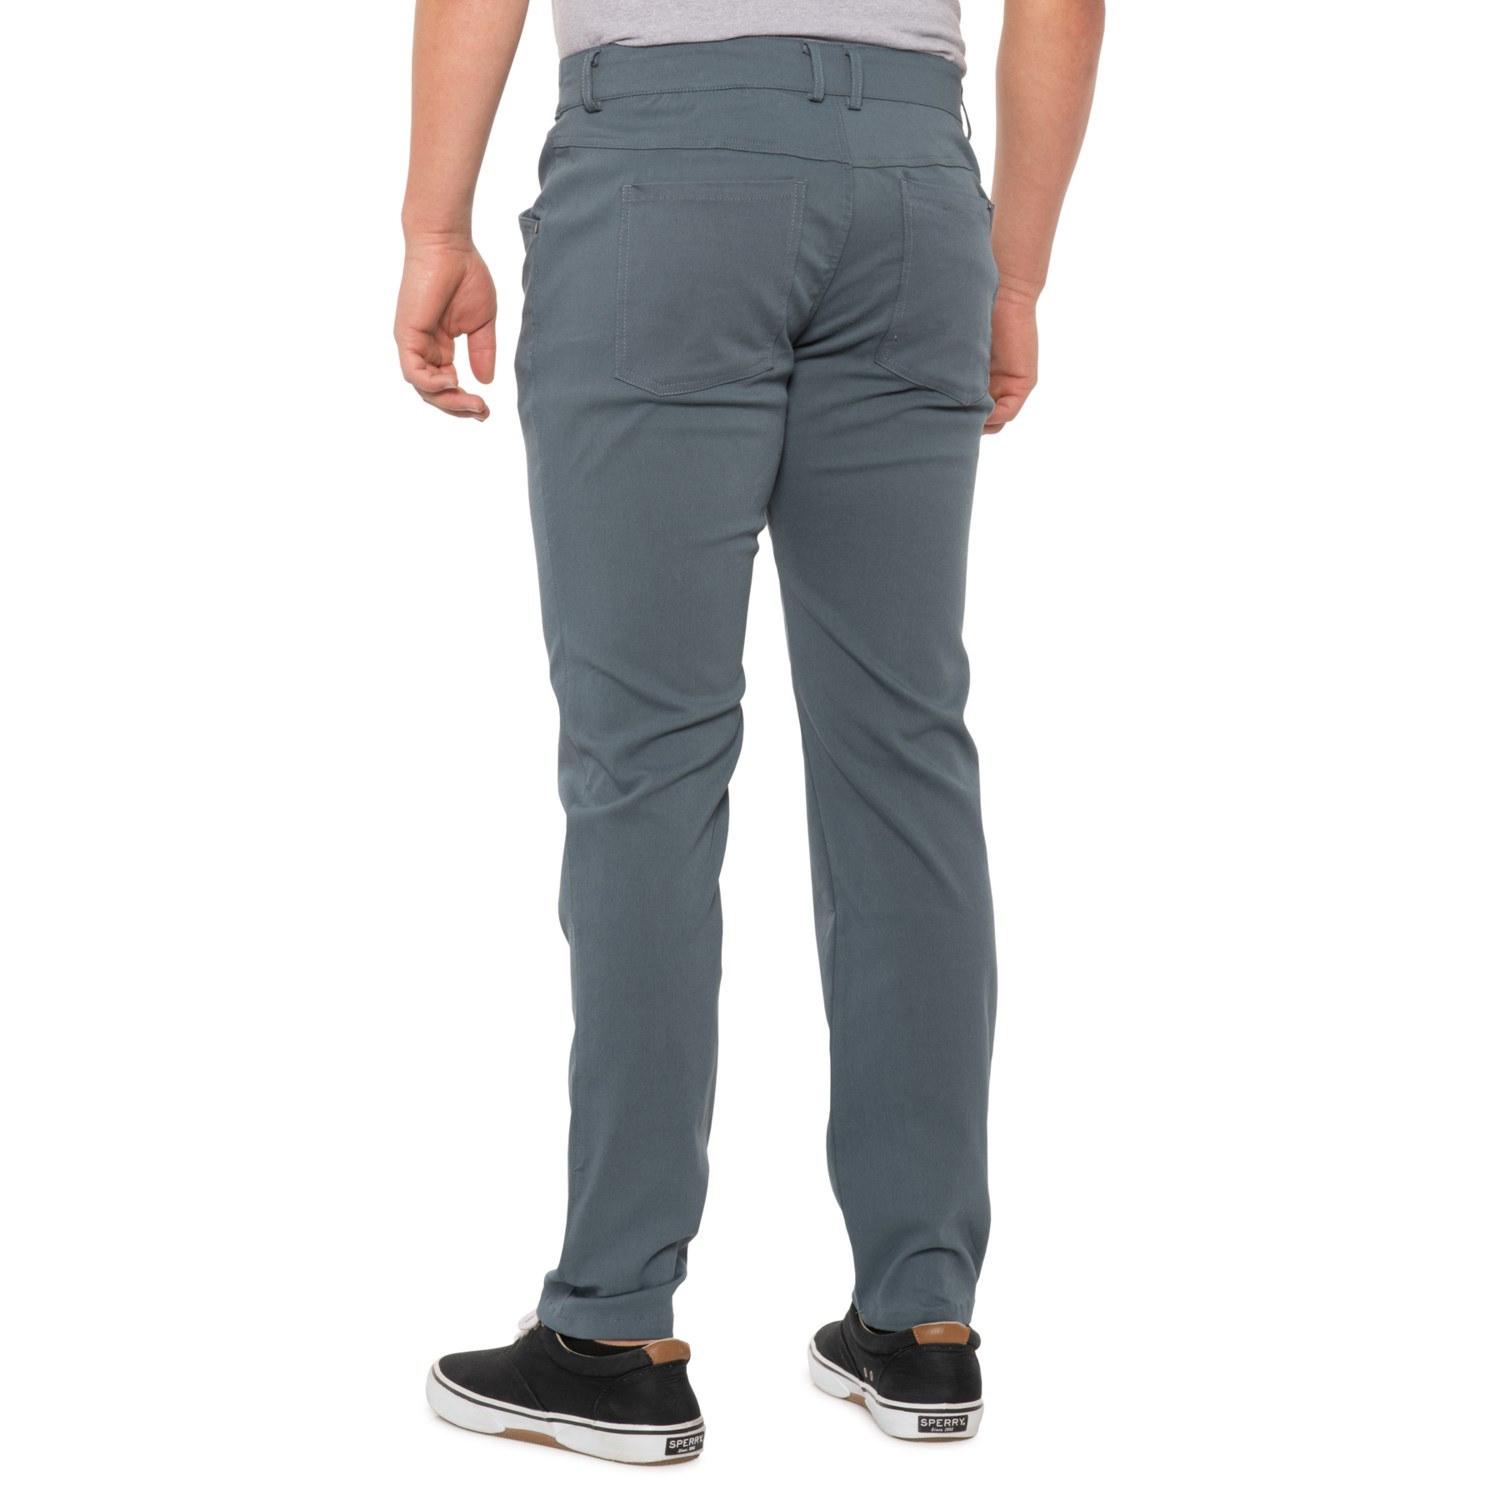 Swiss Alps Stretch Traveler Pants (For Men) - Save 75%